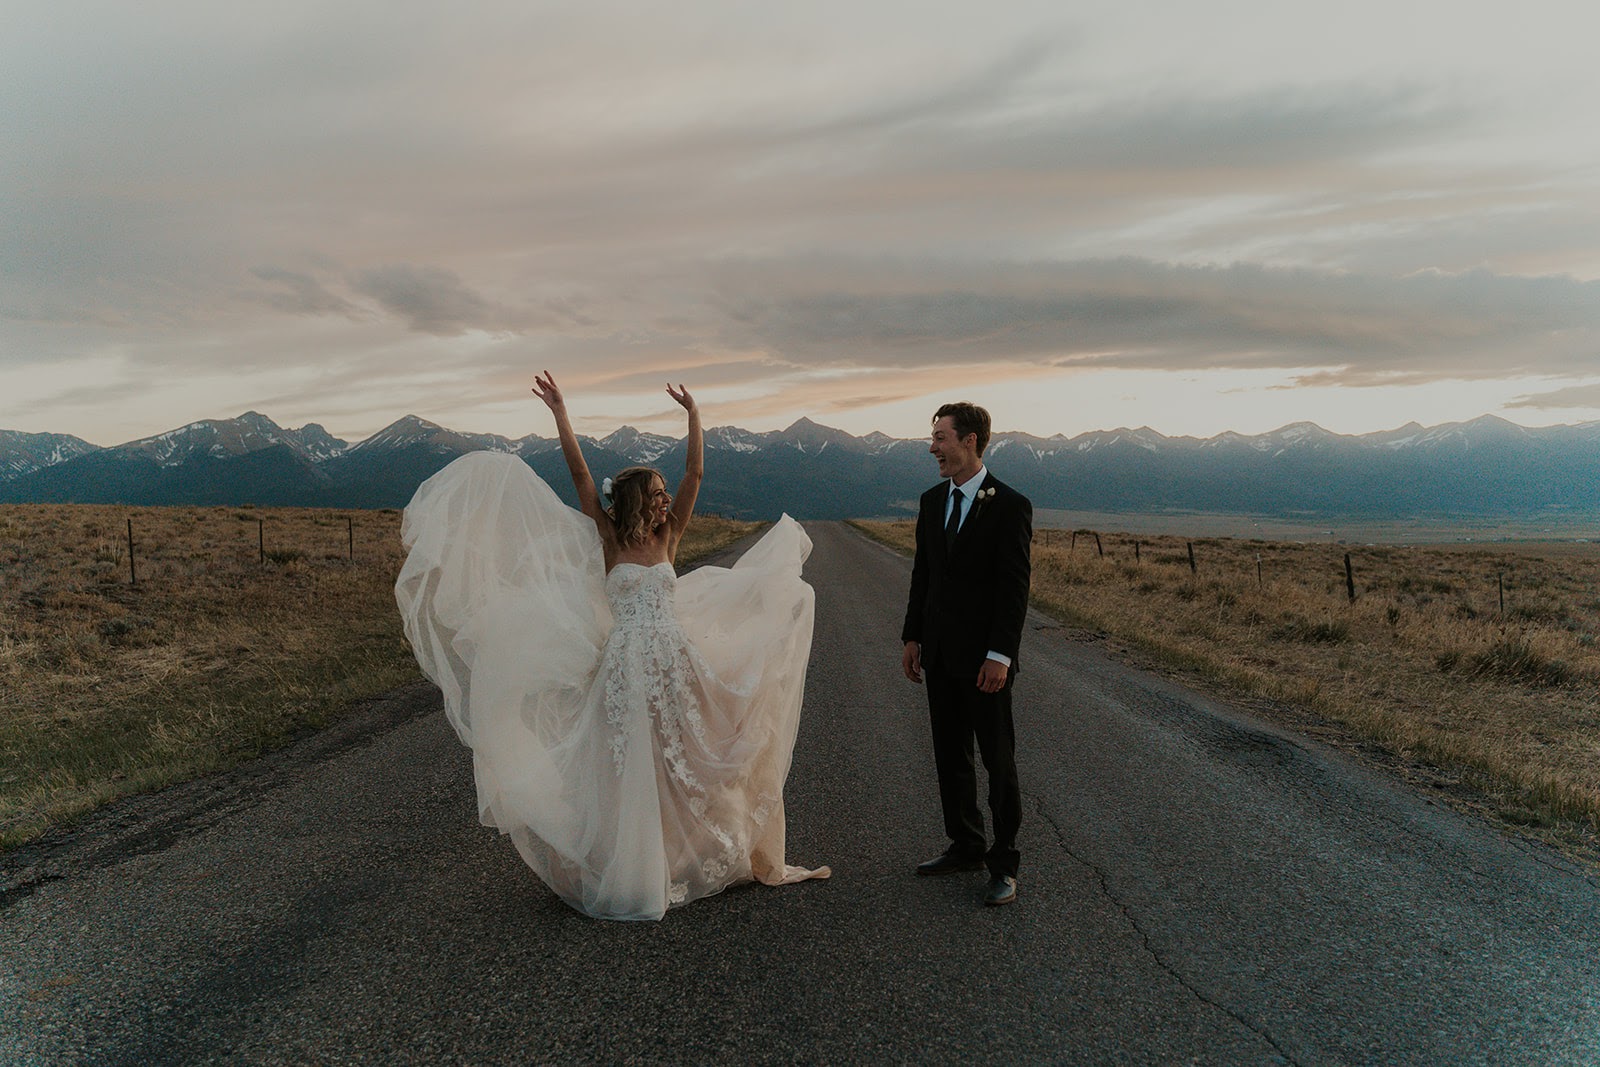 Bride and groom at sunset in the mountains